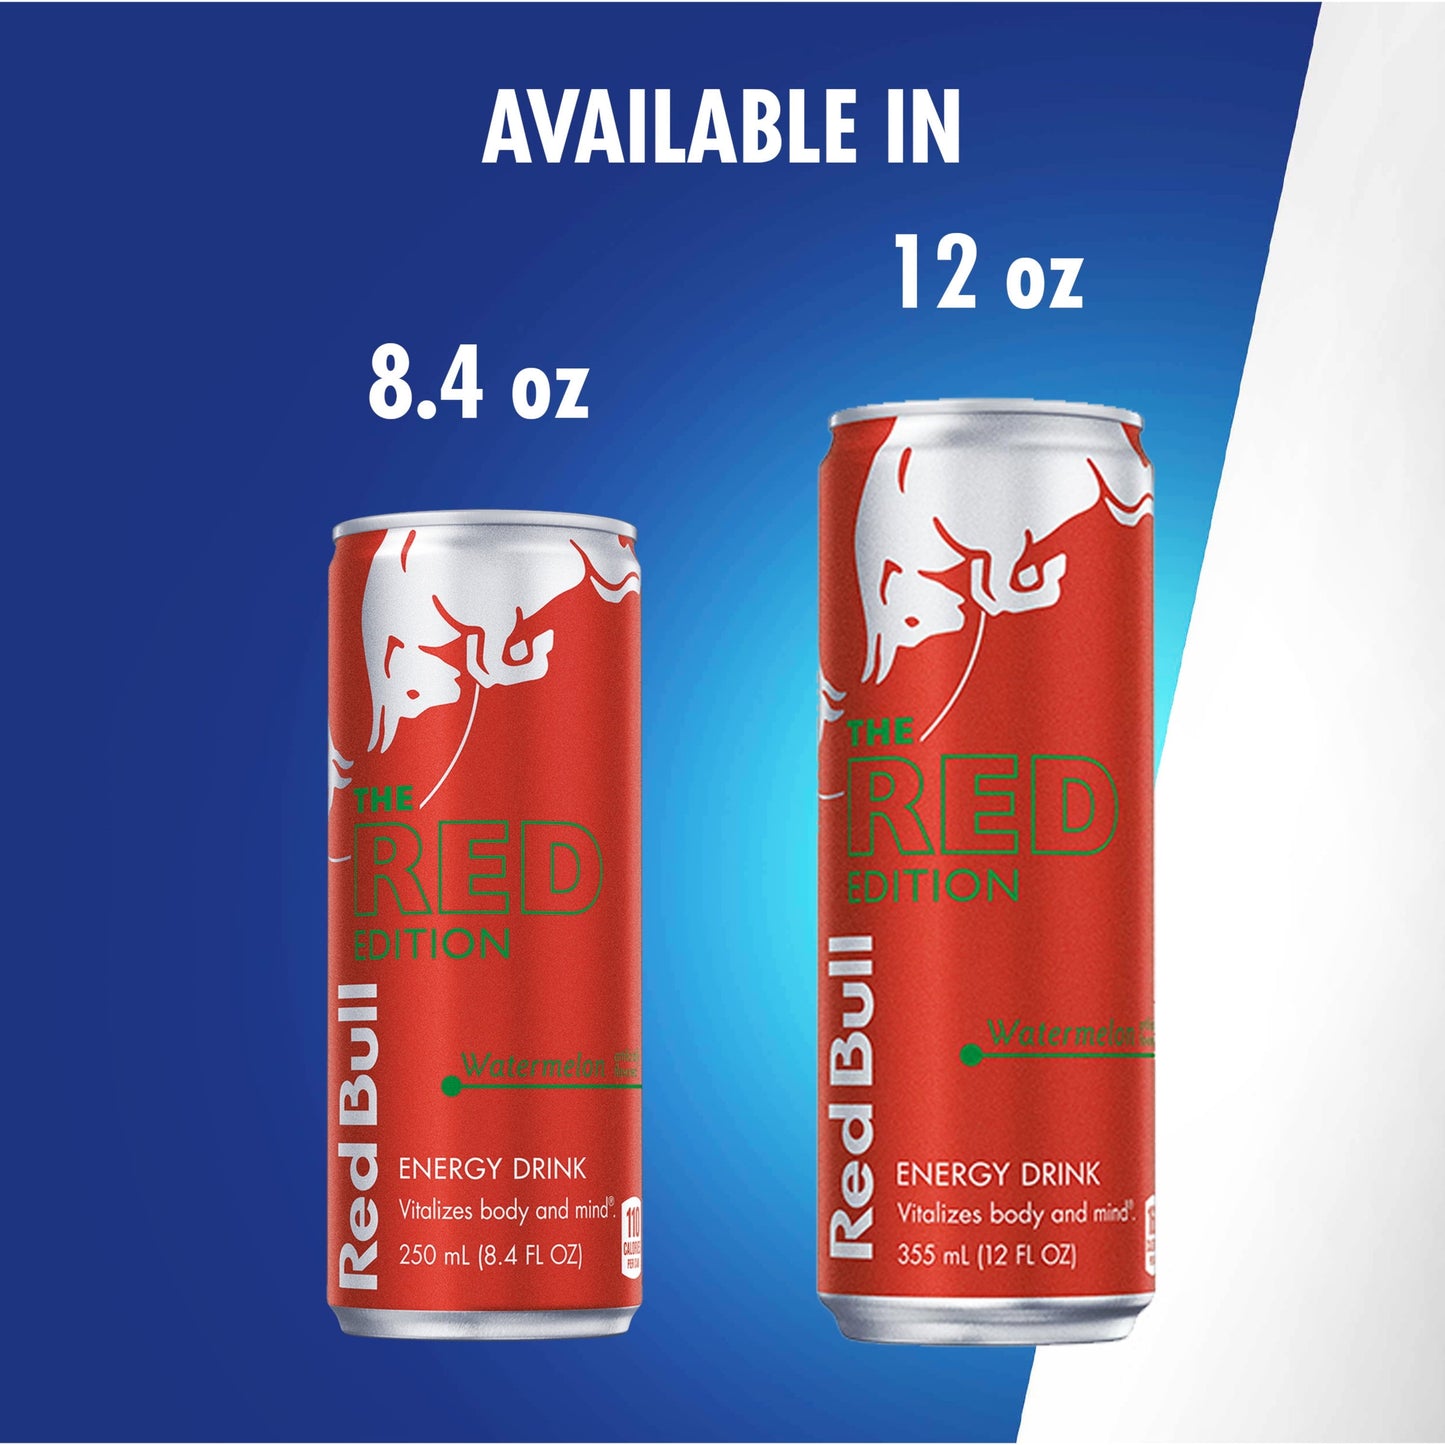 Red Bull Red Edition Watermelon Energy Drink, 12 fl oz, Pack of 4 Cans